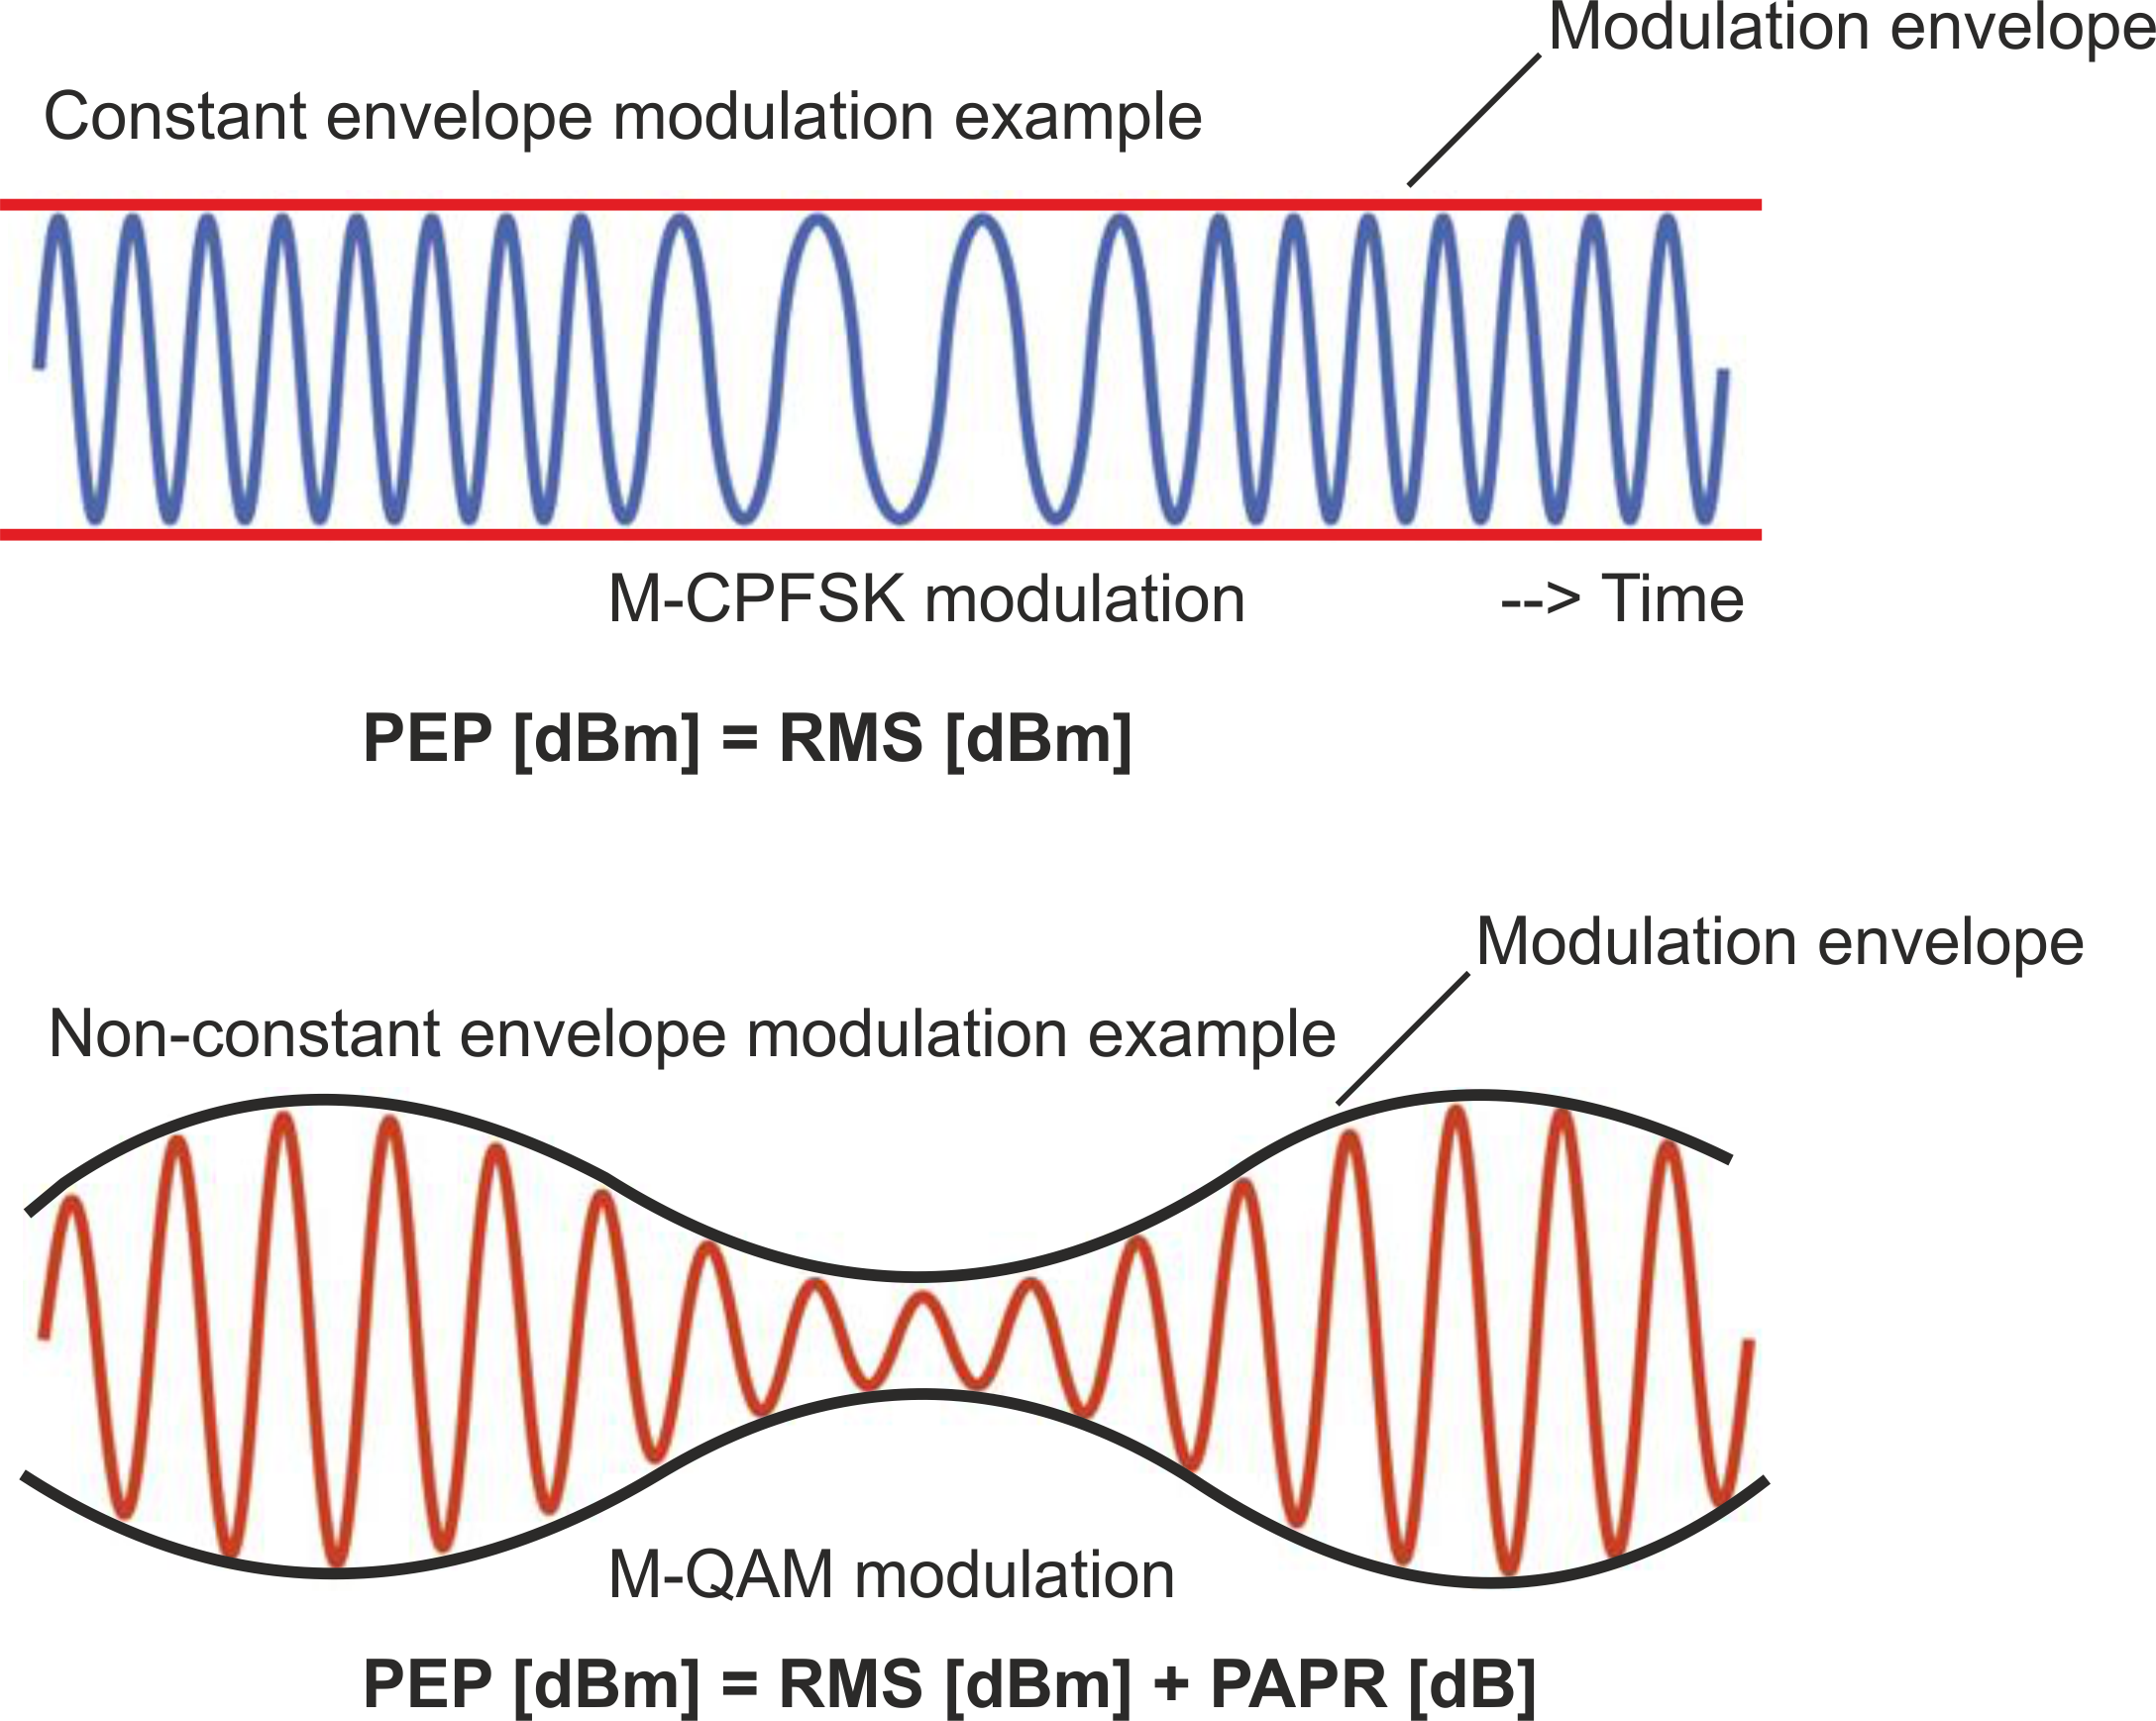 The graphical example of the constant and non-constant envelope modulation